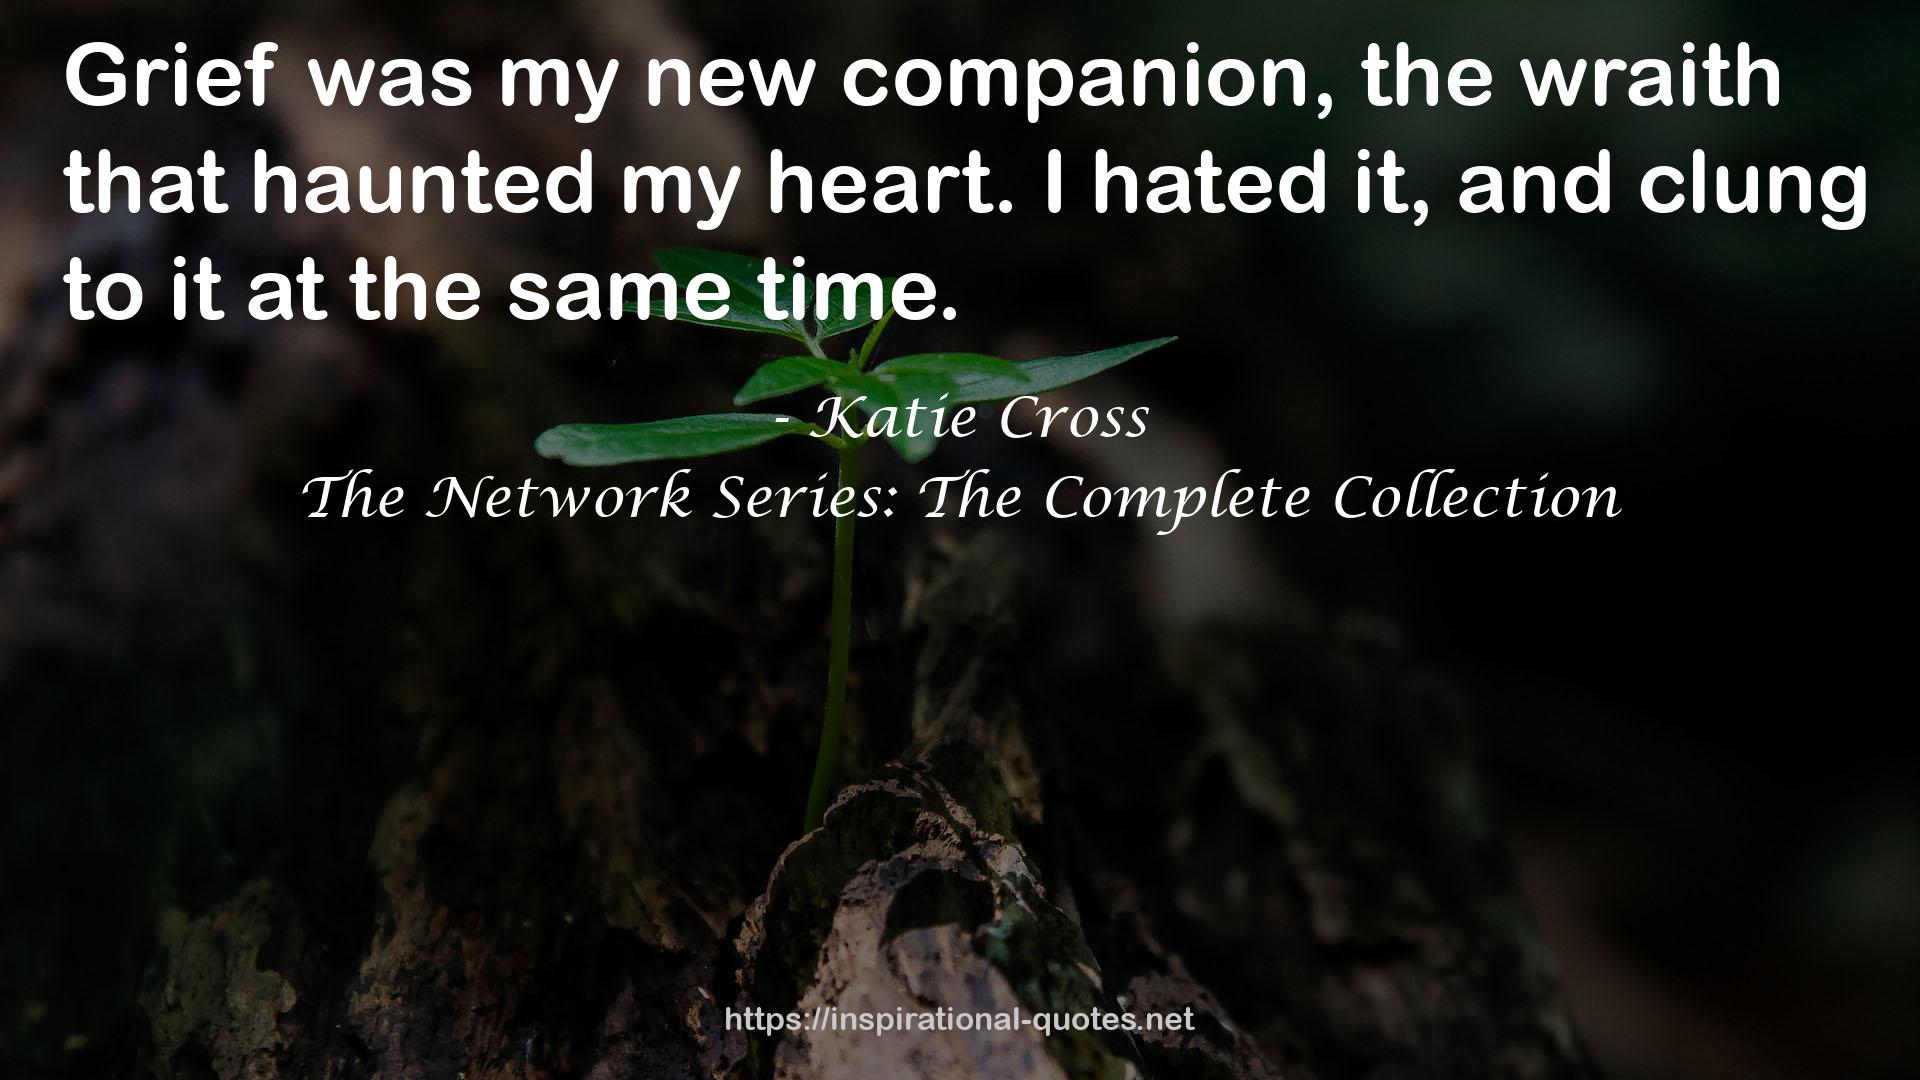 The Network Series: The Complete Collection QUOTES